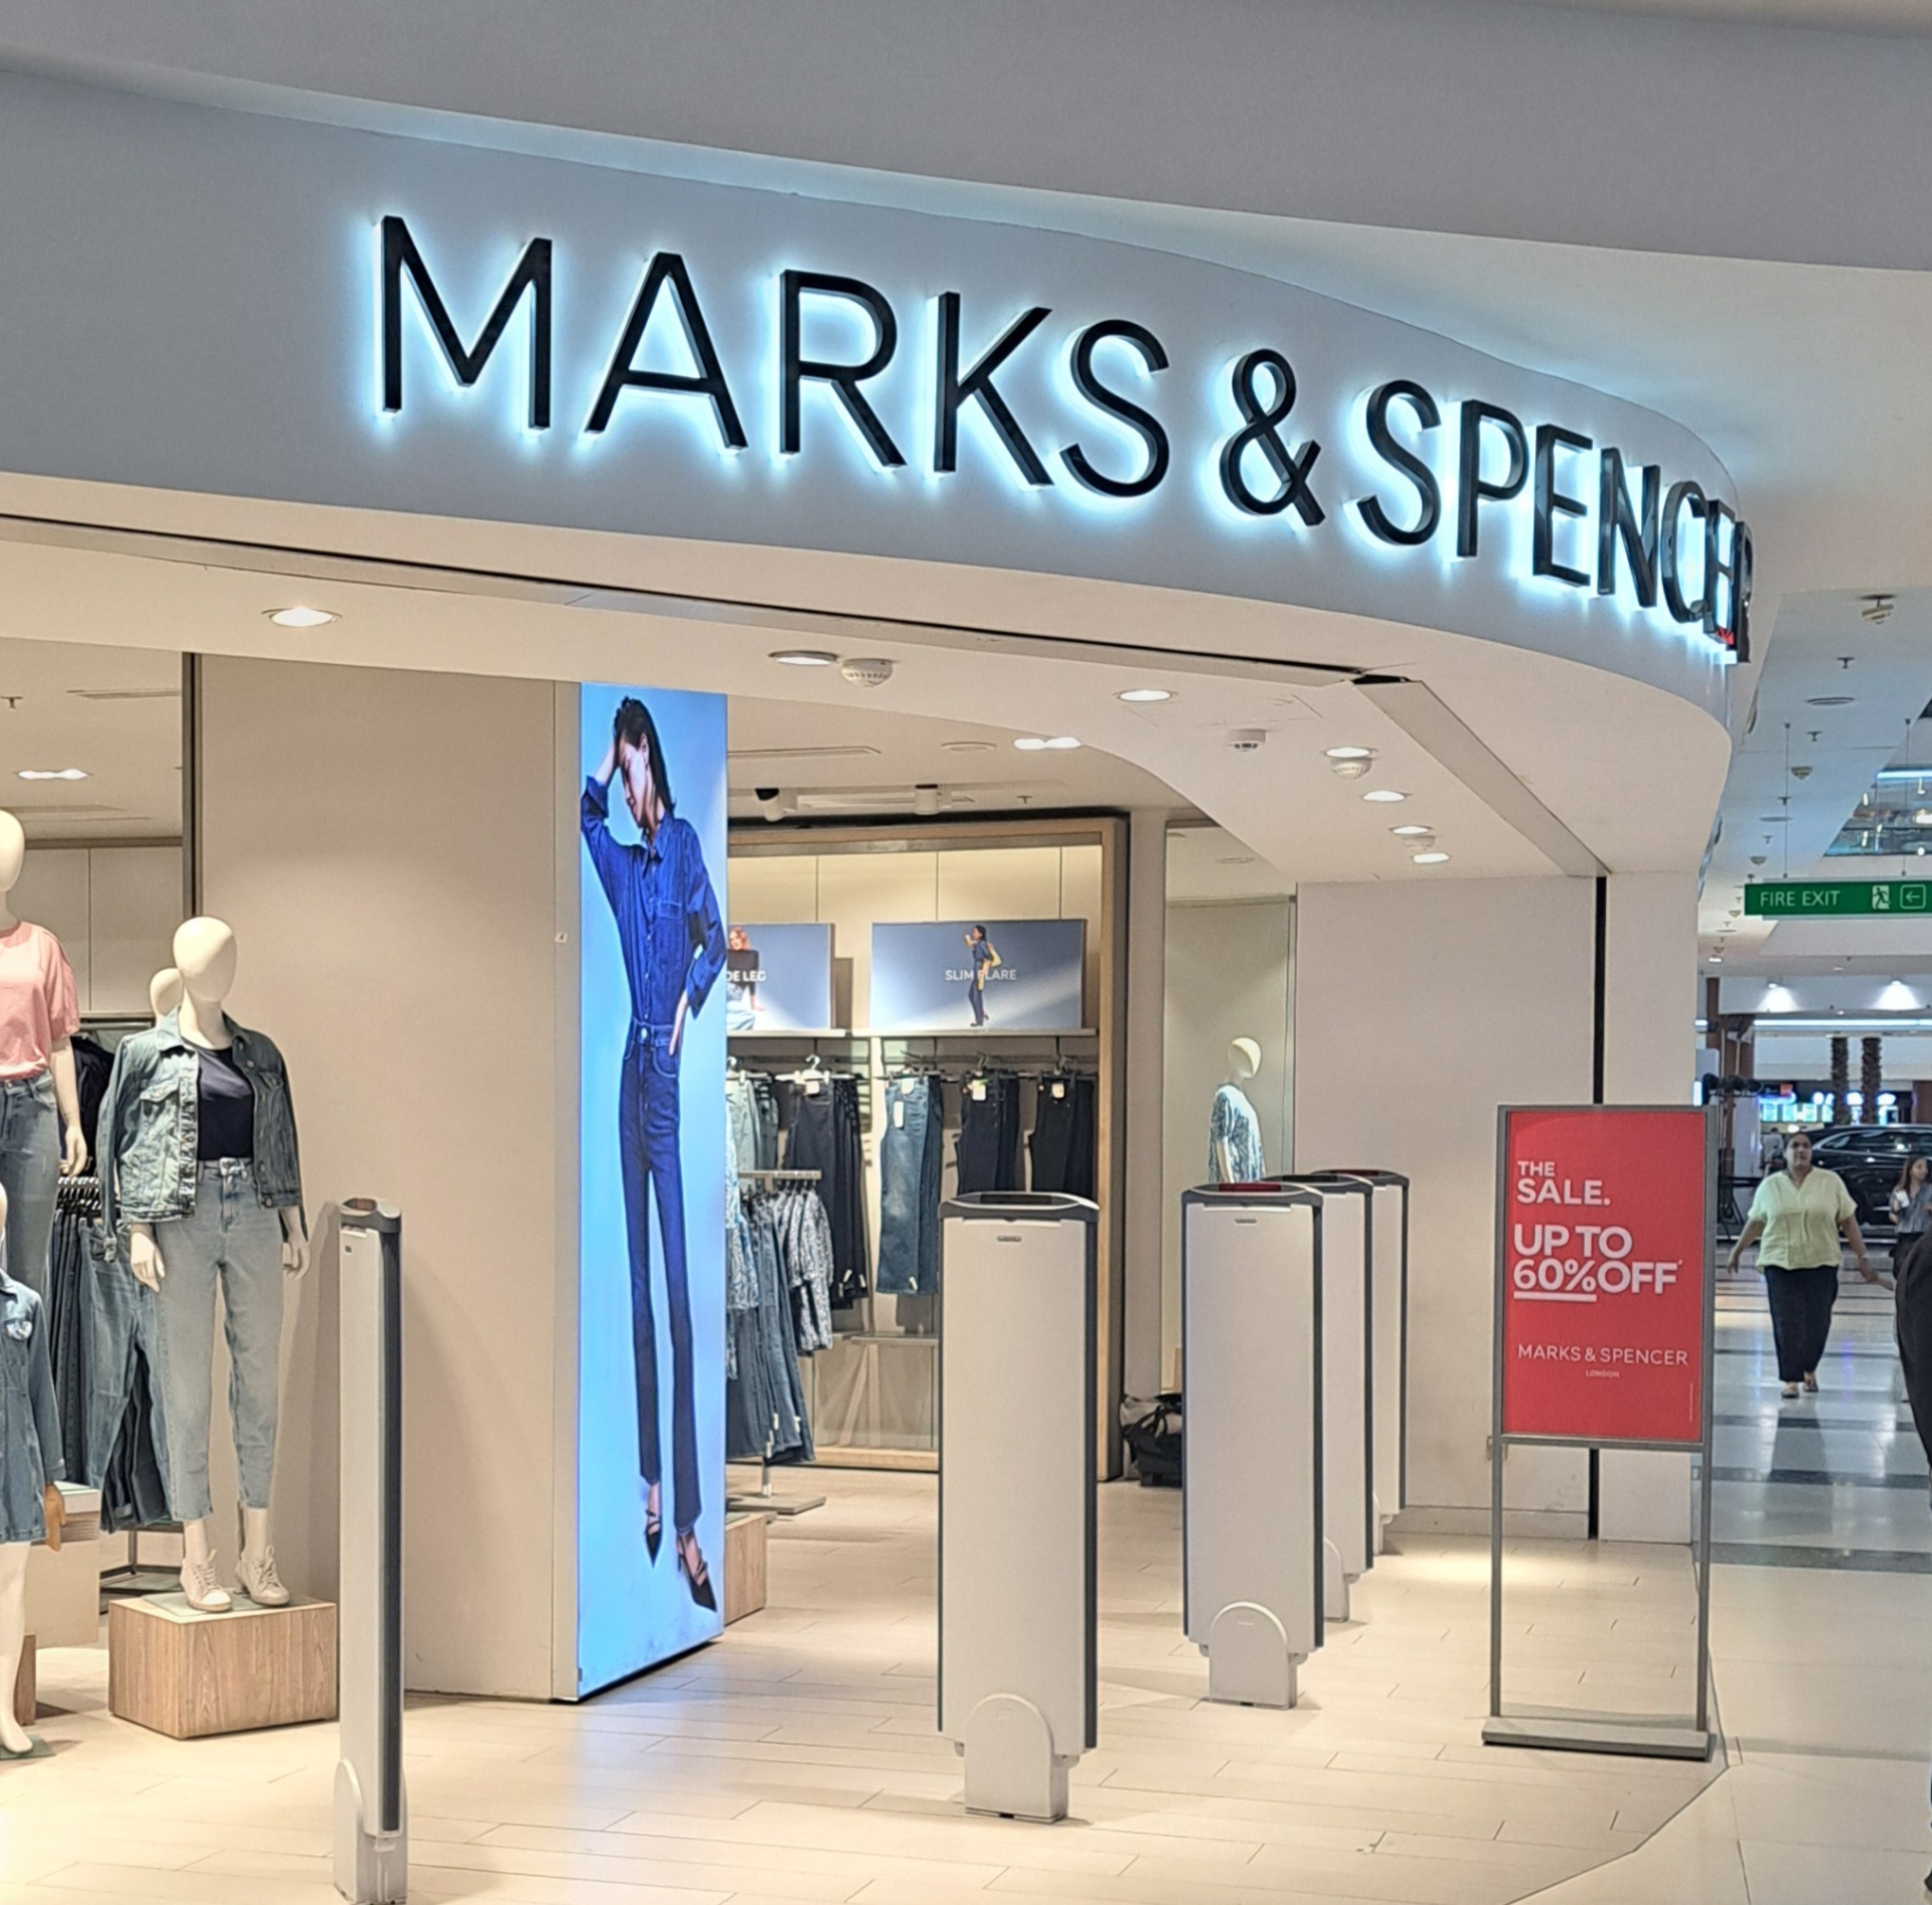 New Deal - Upto 60% Off @MARKS & SPENCER, Bhopal